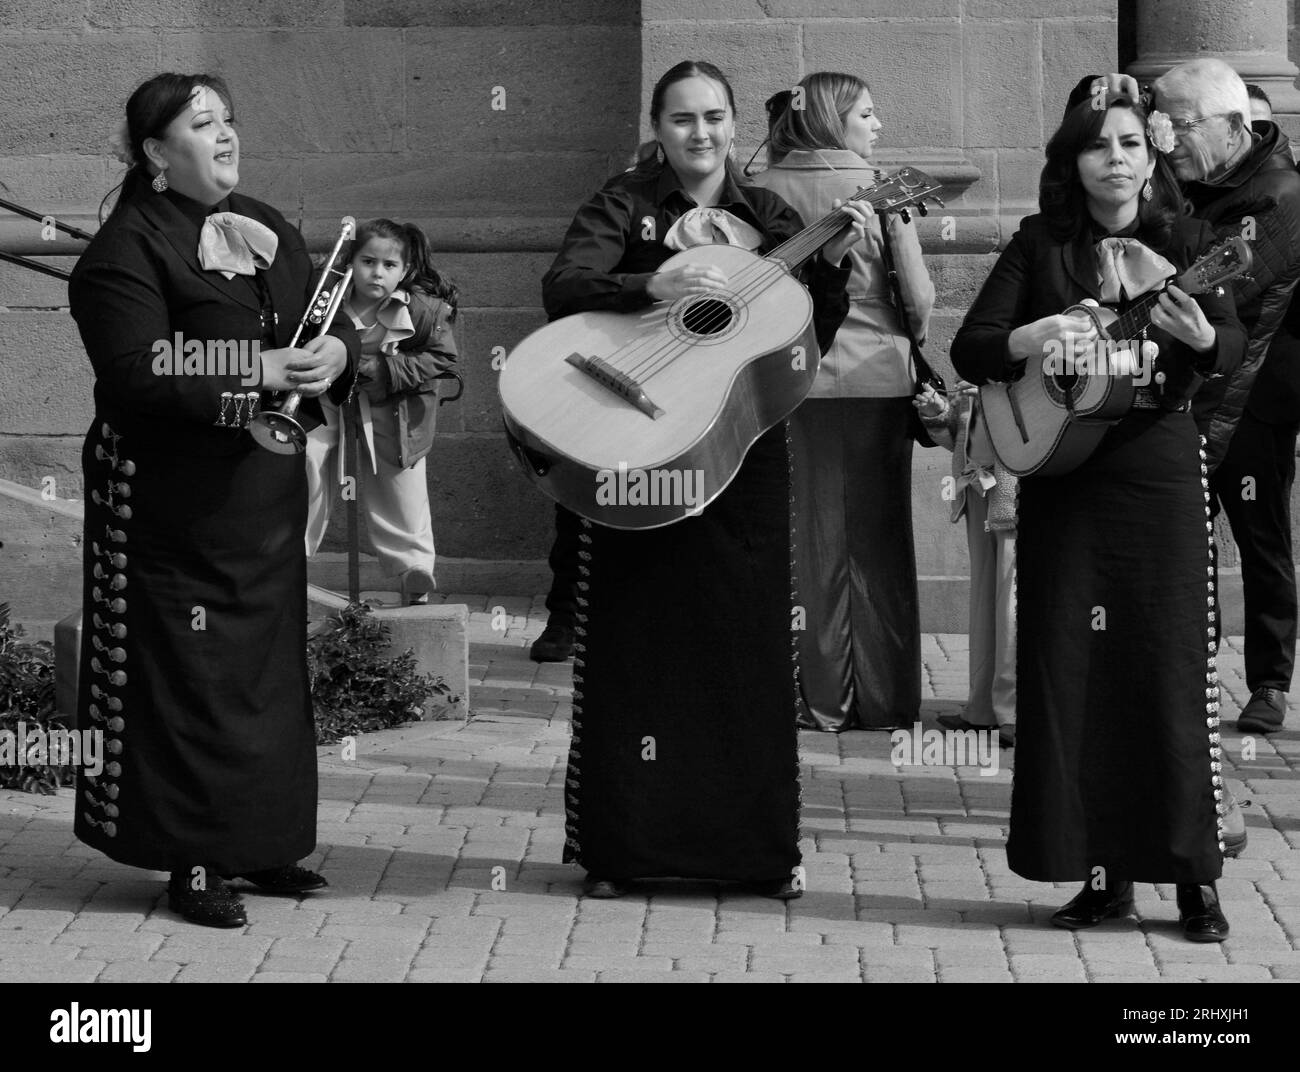 Members of a female mariachi band perform in Santa Fe, New Mexico. Stock Photo